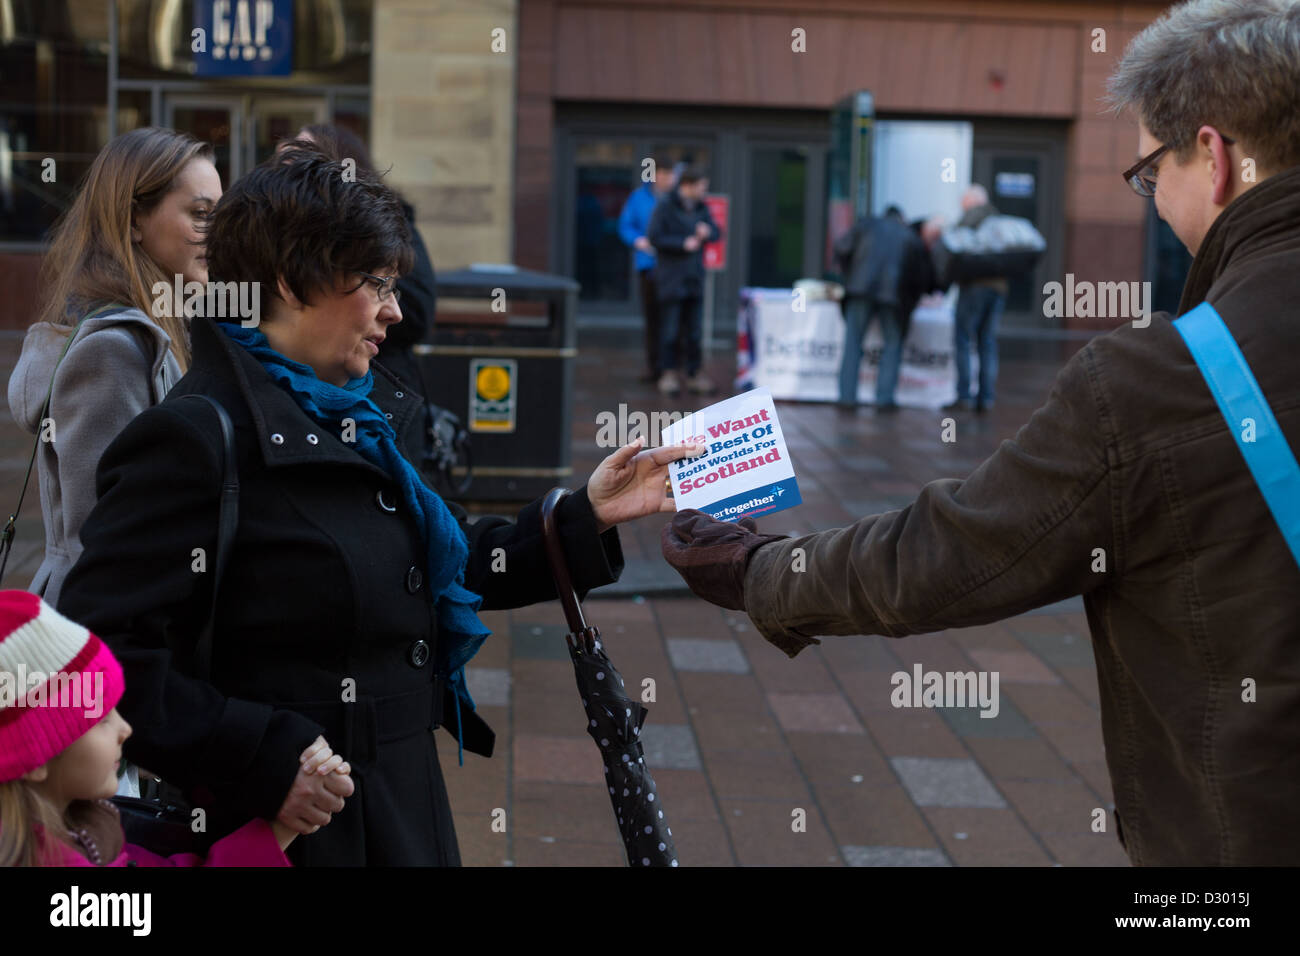 The 'Better Together' multi-party/ anti-independence/ pro-Union, leafleting team campaign in Glasgow, Scotland. Stock Photo